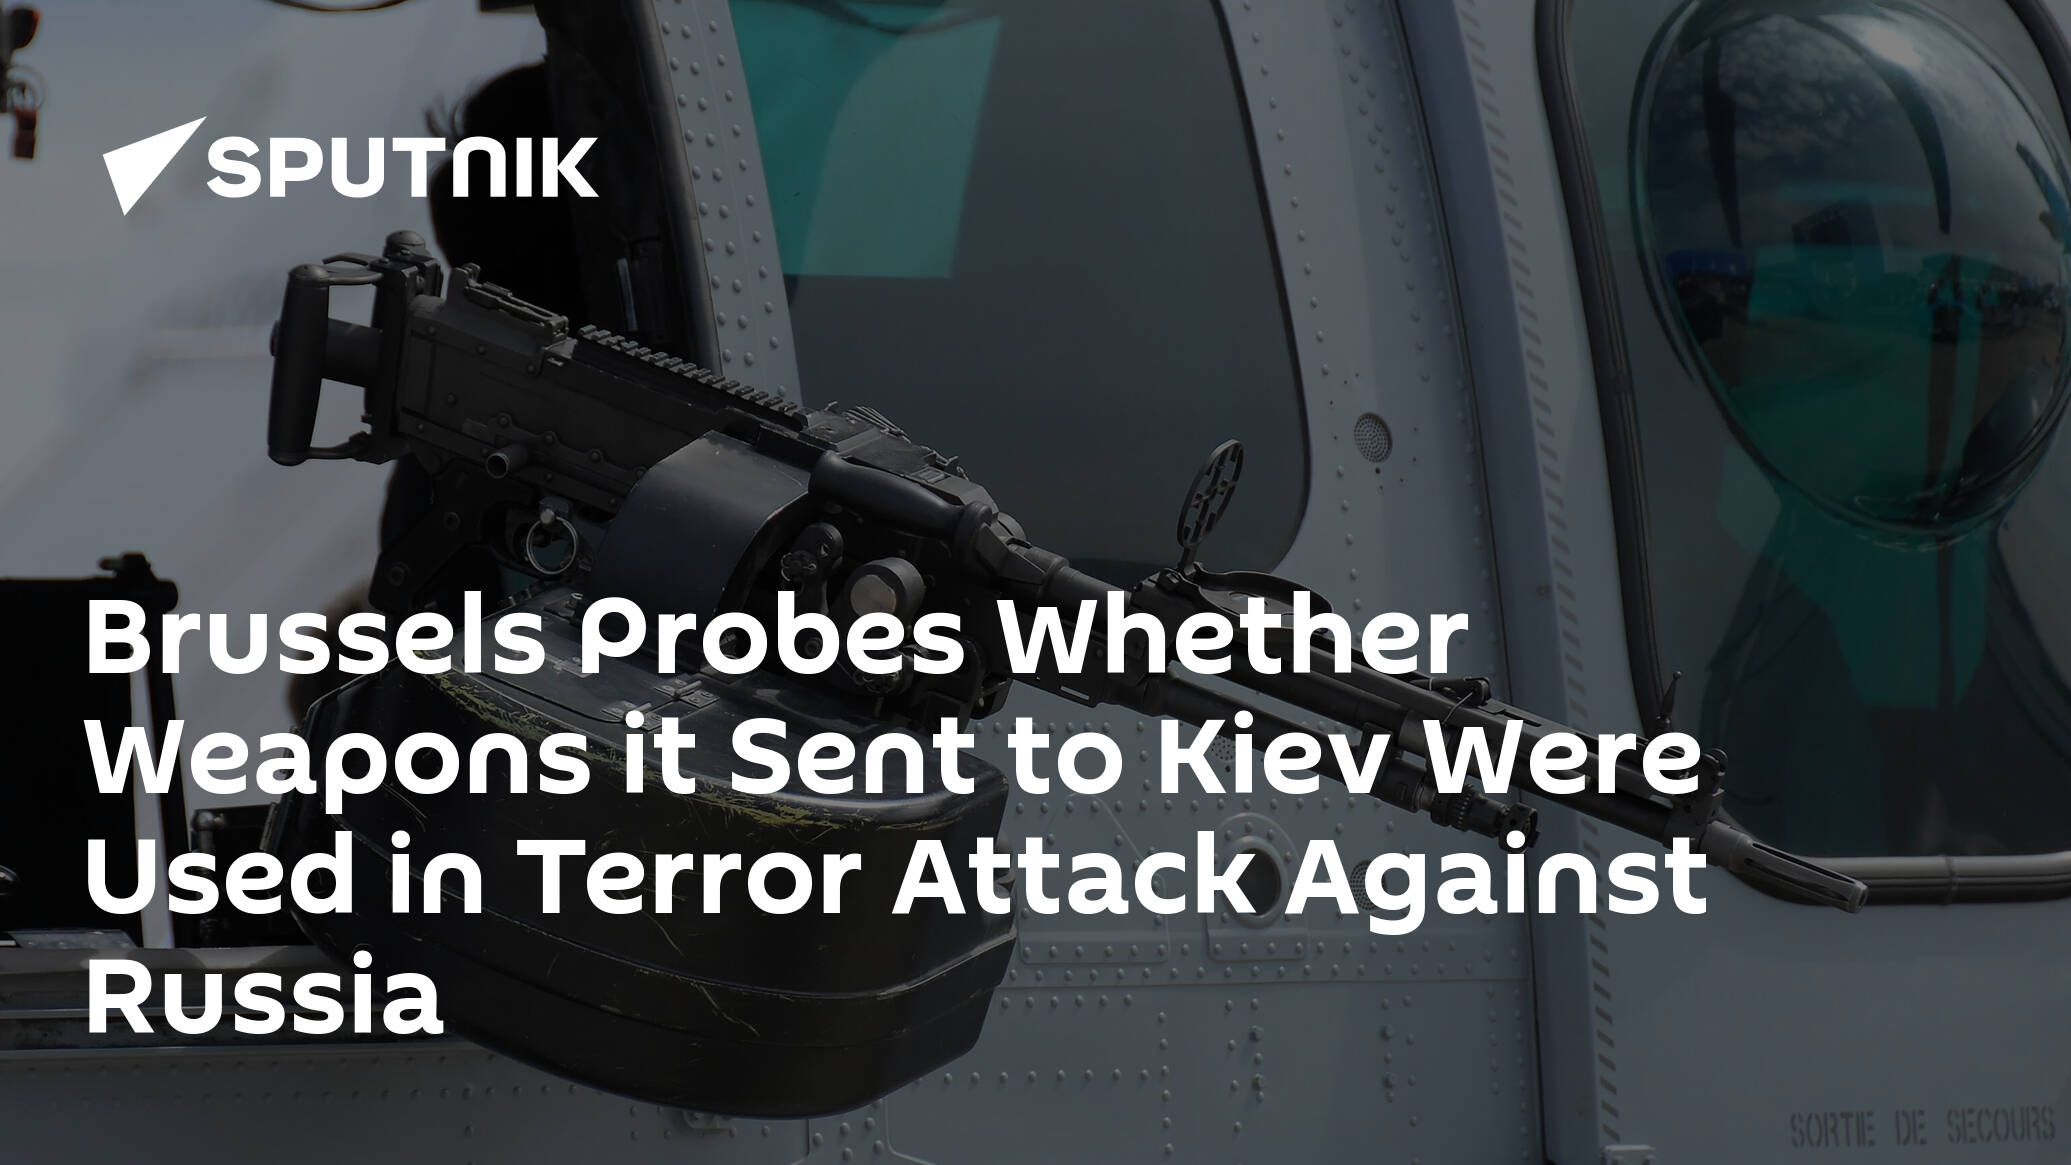 Brussels Probes Whether Weapons it Sent to Kiev Were Used in Terror Attack Against Russia